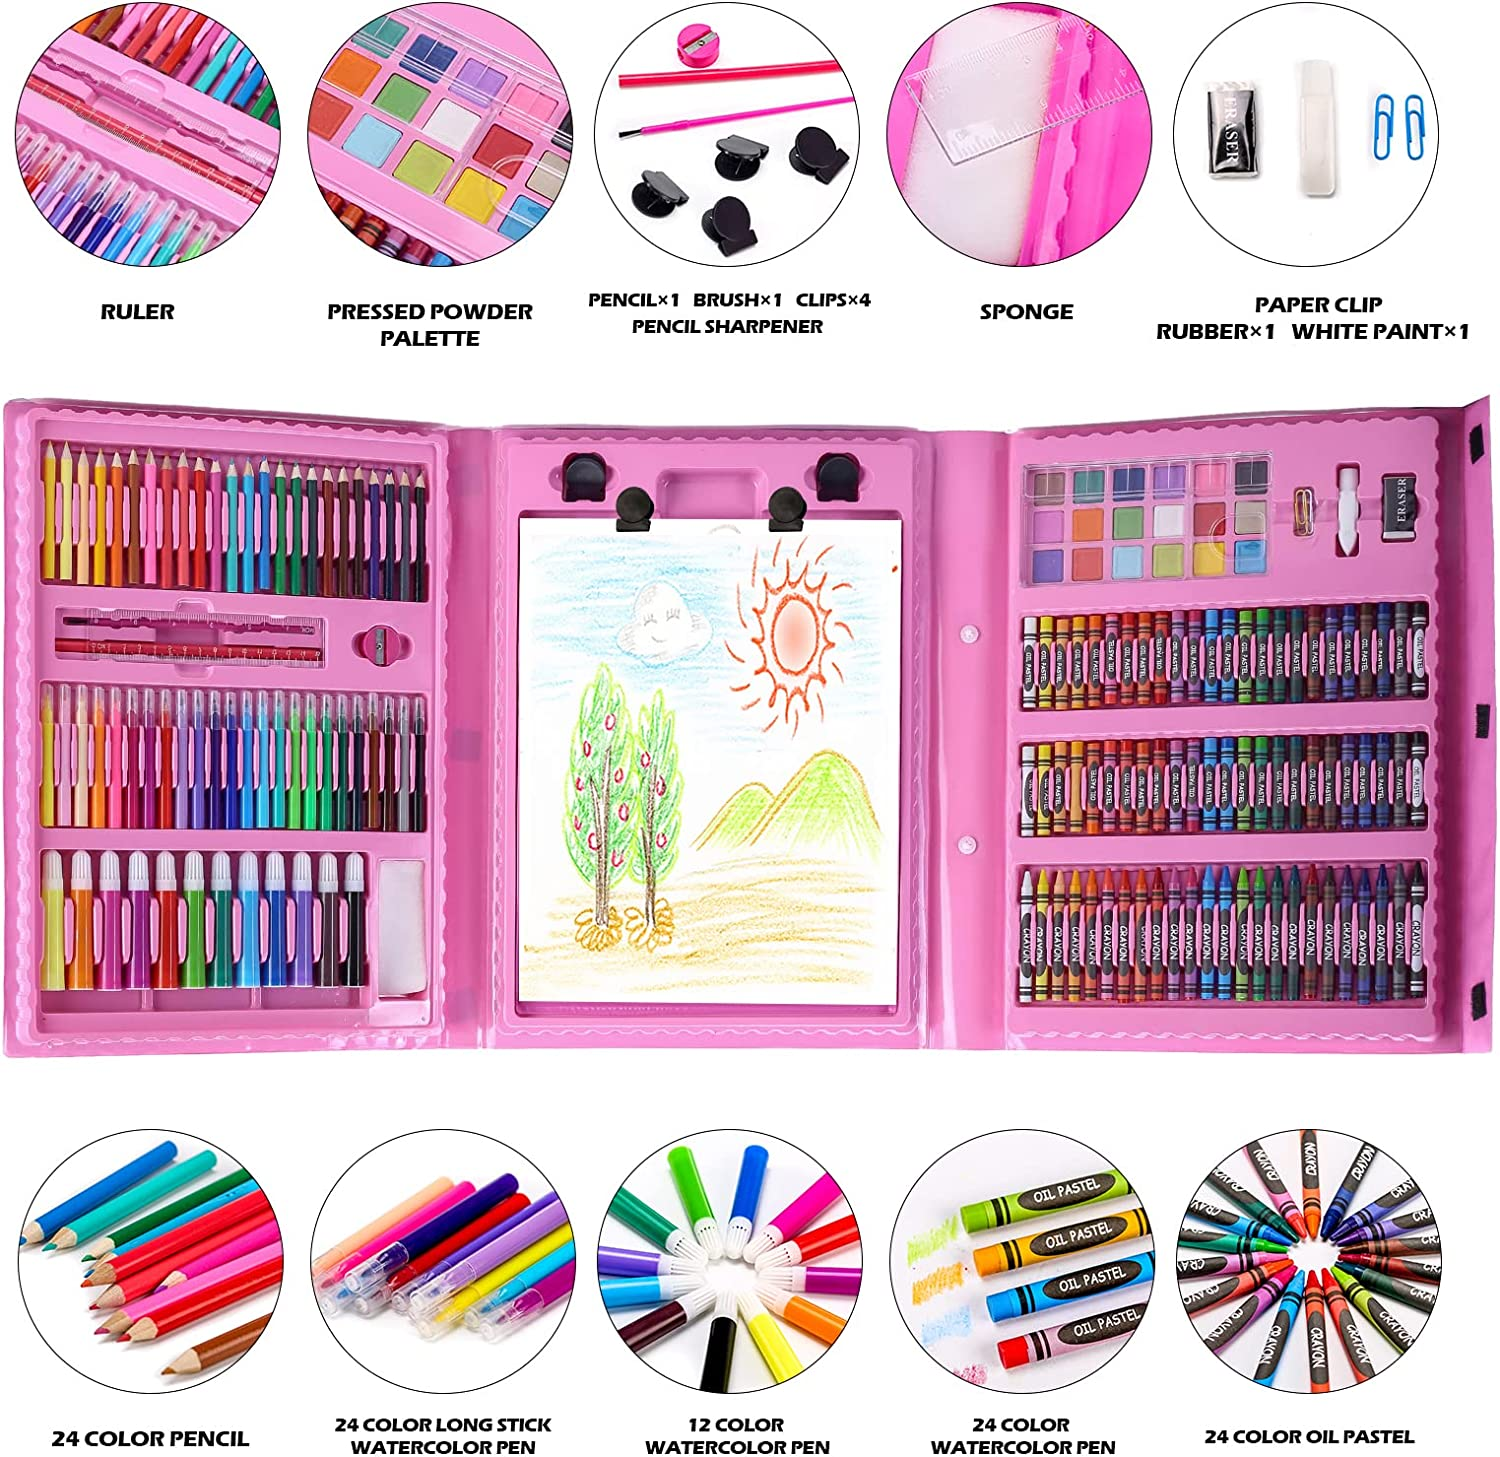 Two 68-Piece Art Kits for Kids Only $14.99 Shipped! - Pandora's Deals